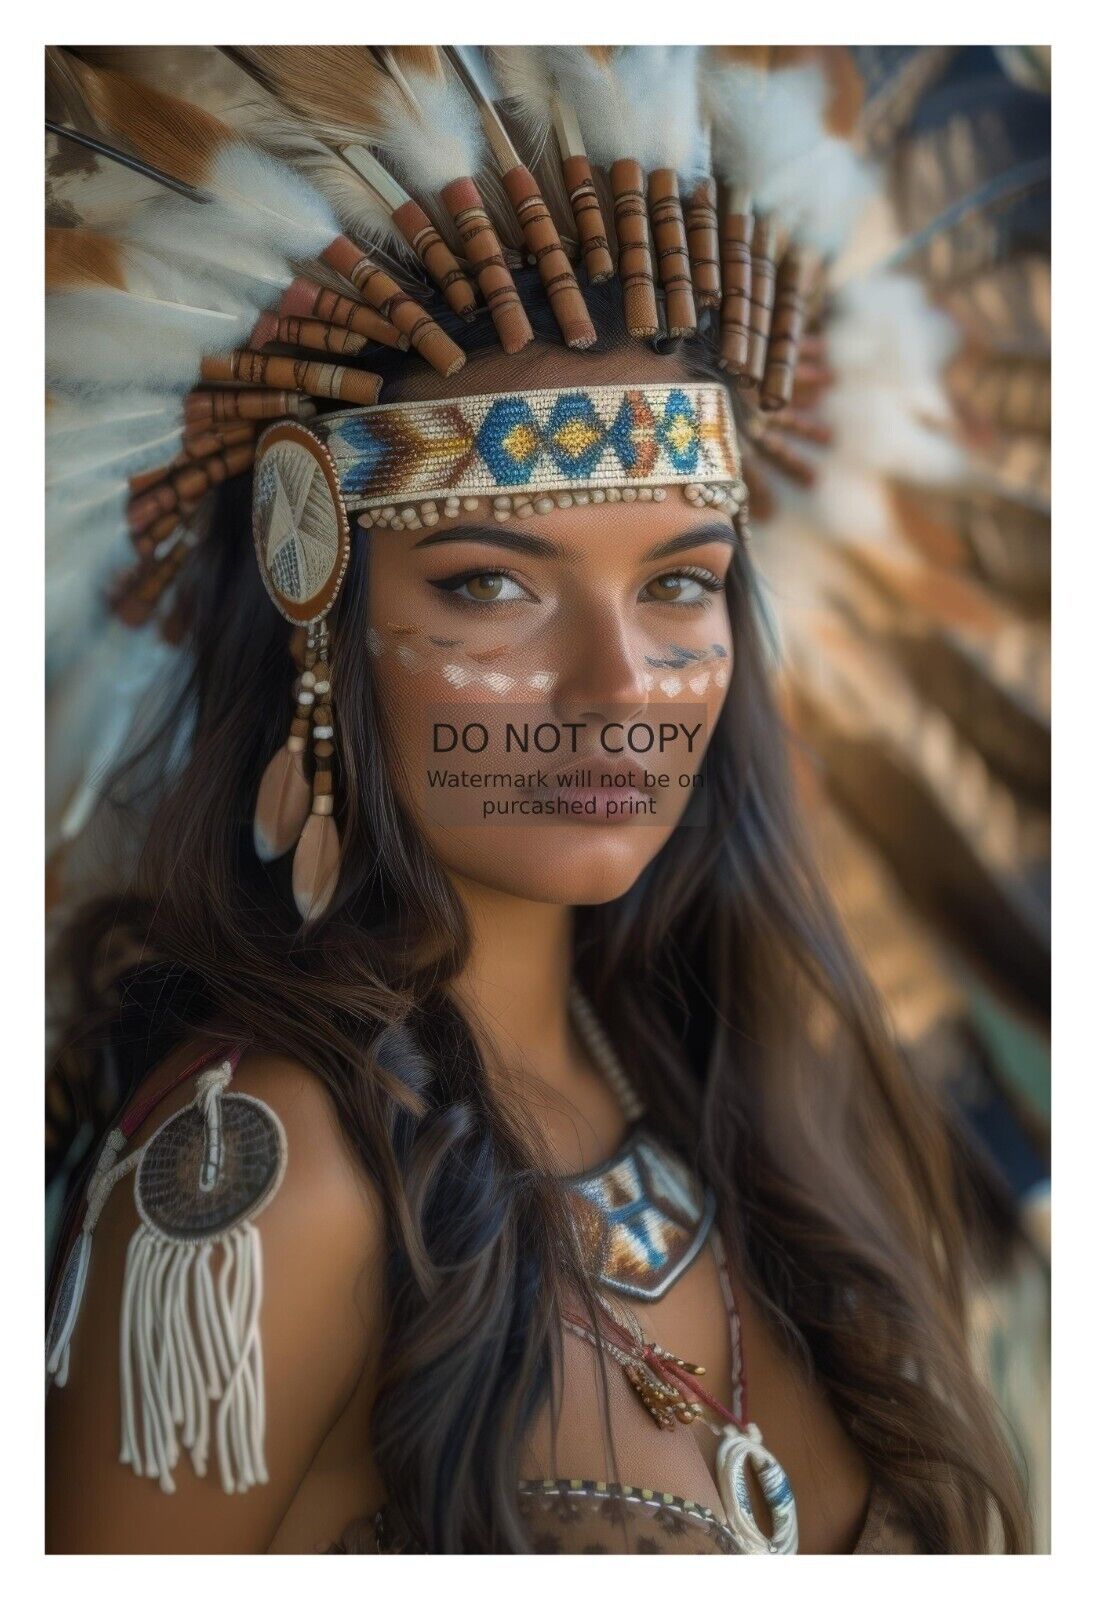 GORGEOUS YOUNG SEXY NATIVE AMEIRCAN LADY WEARING HEADRESS 4X6 FANTASY PHOTO